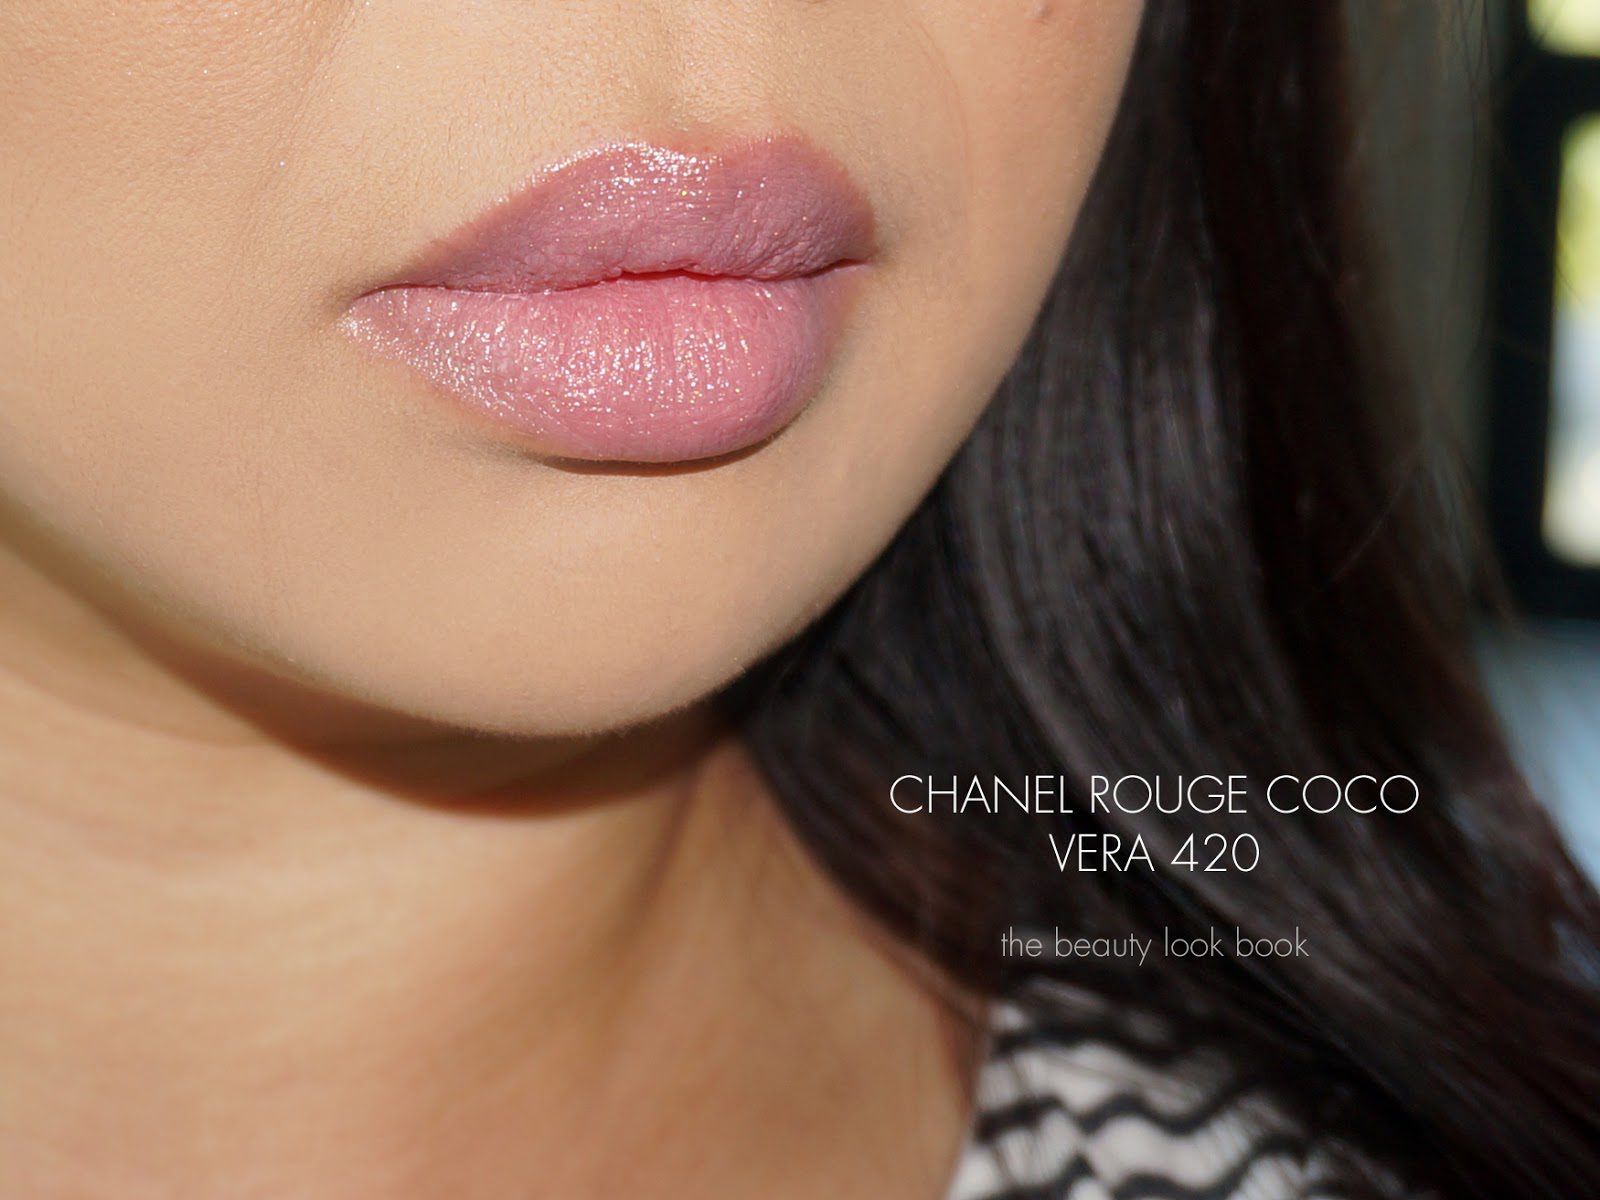 rouge coco mademoiselle chanel